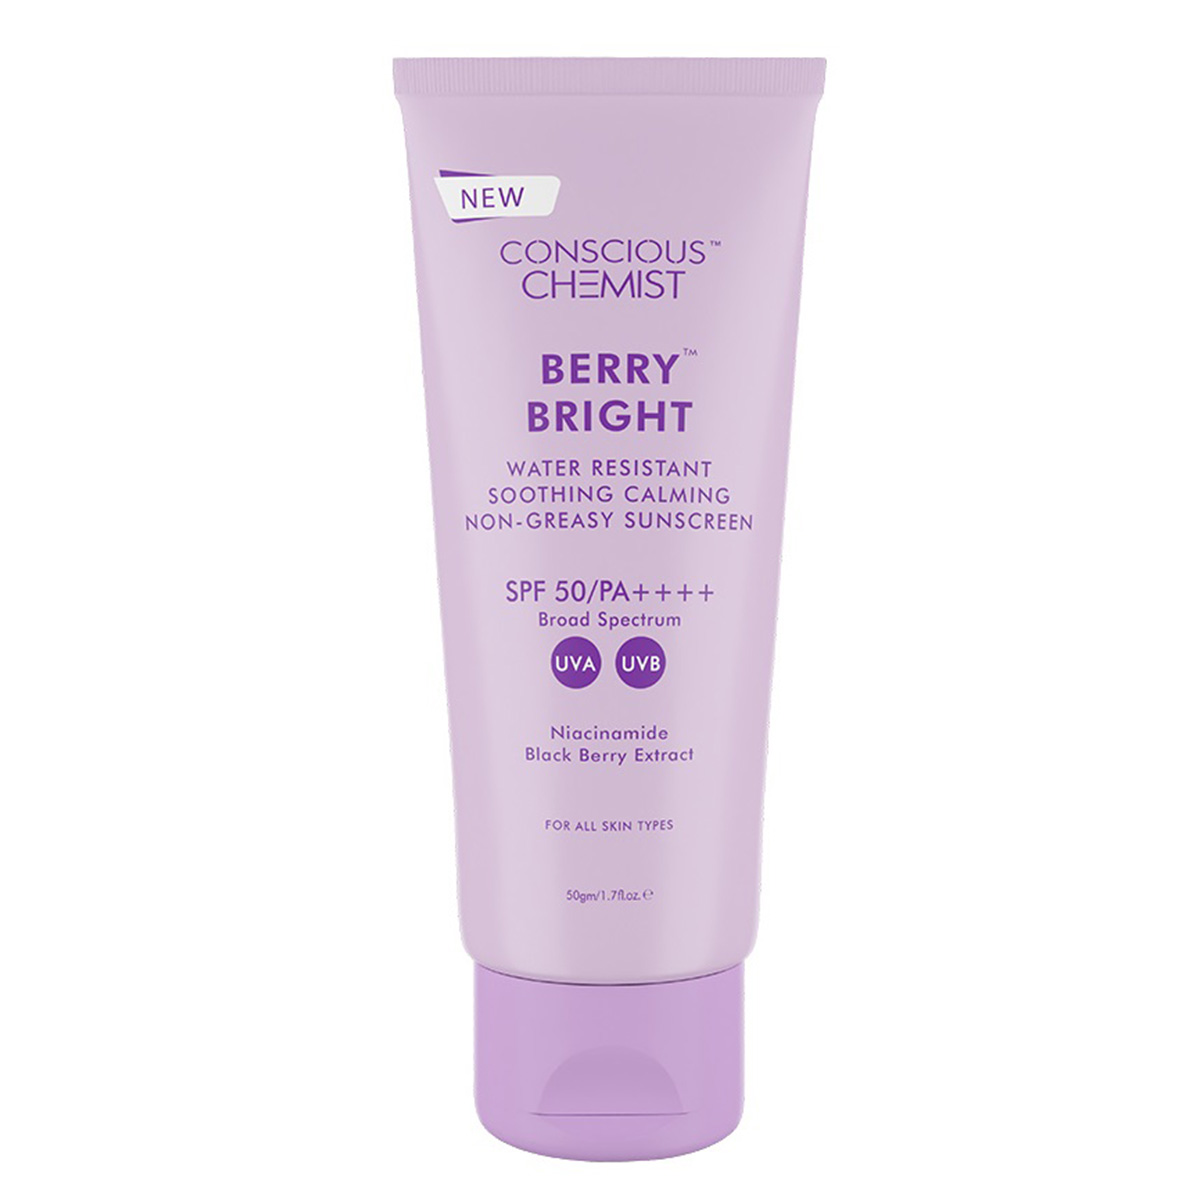 Conscious Chemist Berry Bright Sunscreen With SPF 50 PA ++++, 50gm